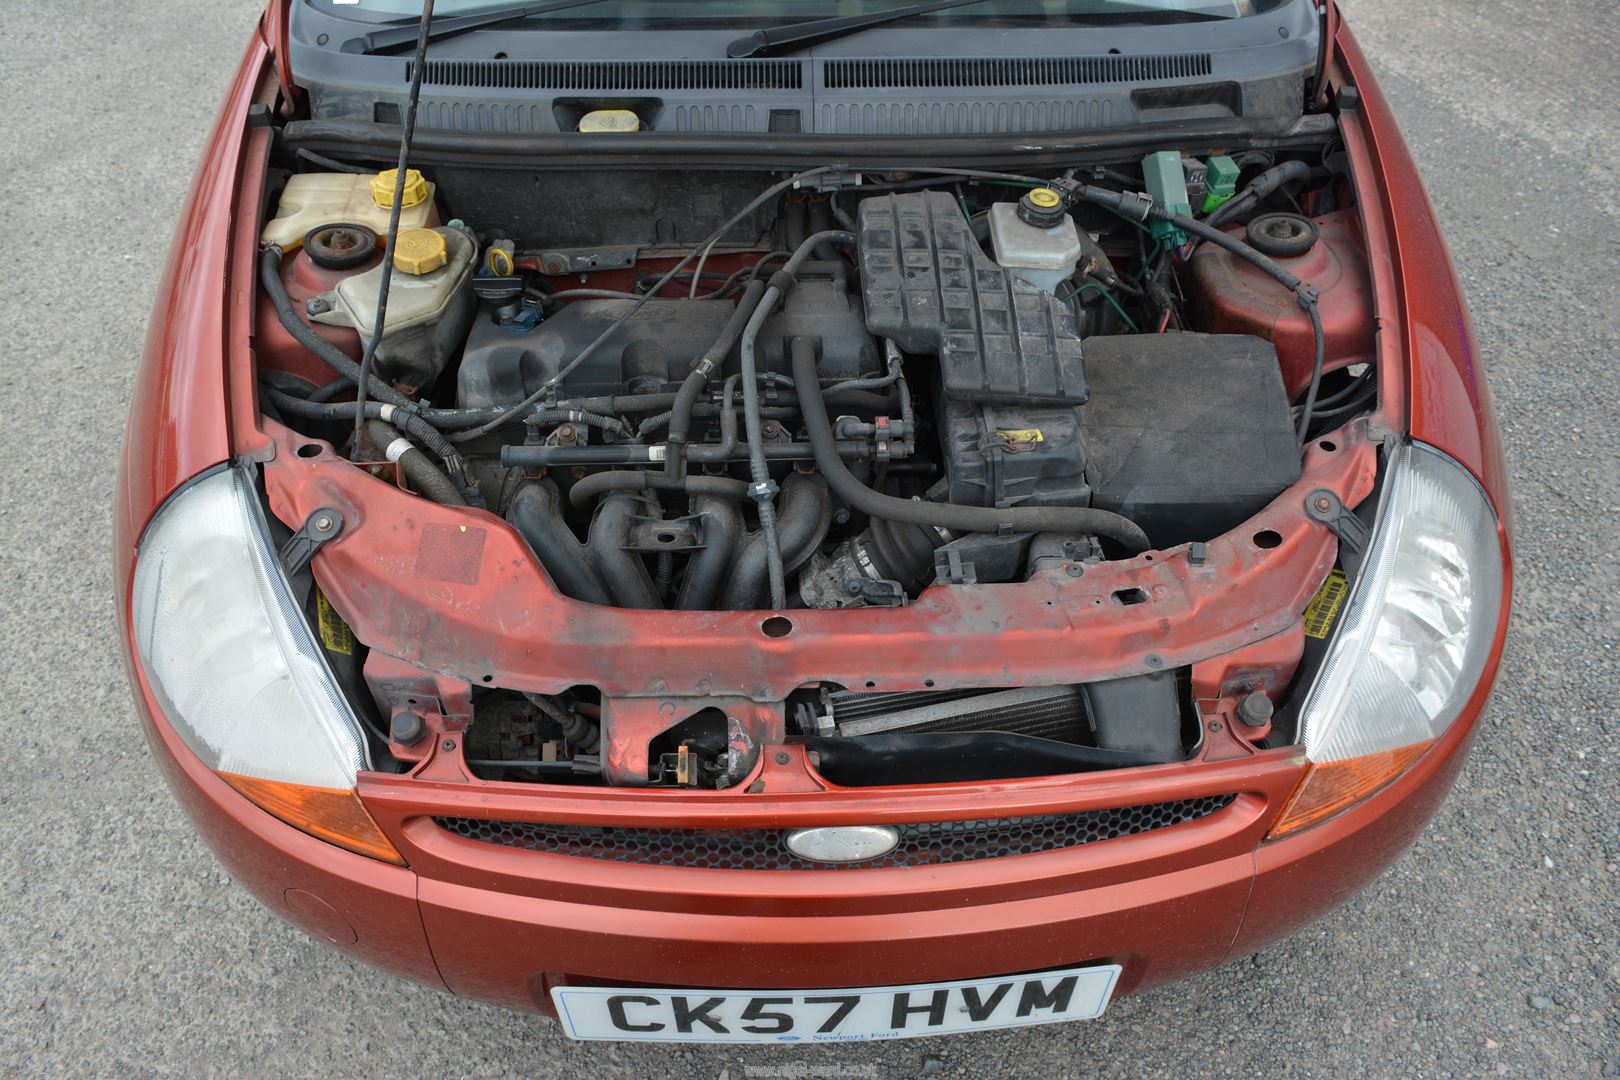 A Ford KA Zetec Climate 1299cc petrol-engined three door hatchback motor Car finished in red, - Image 13 of 14